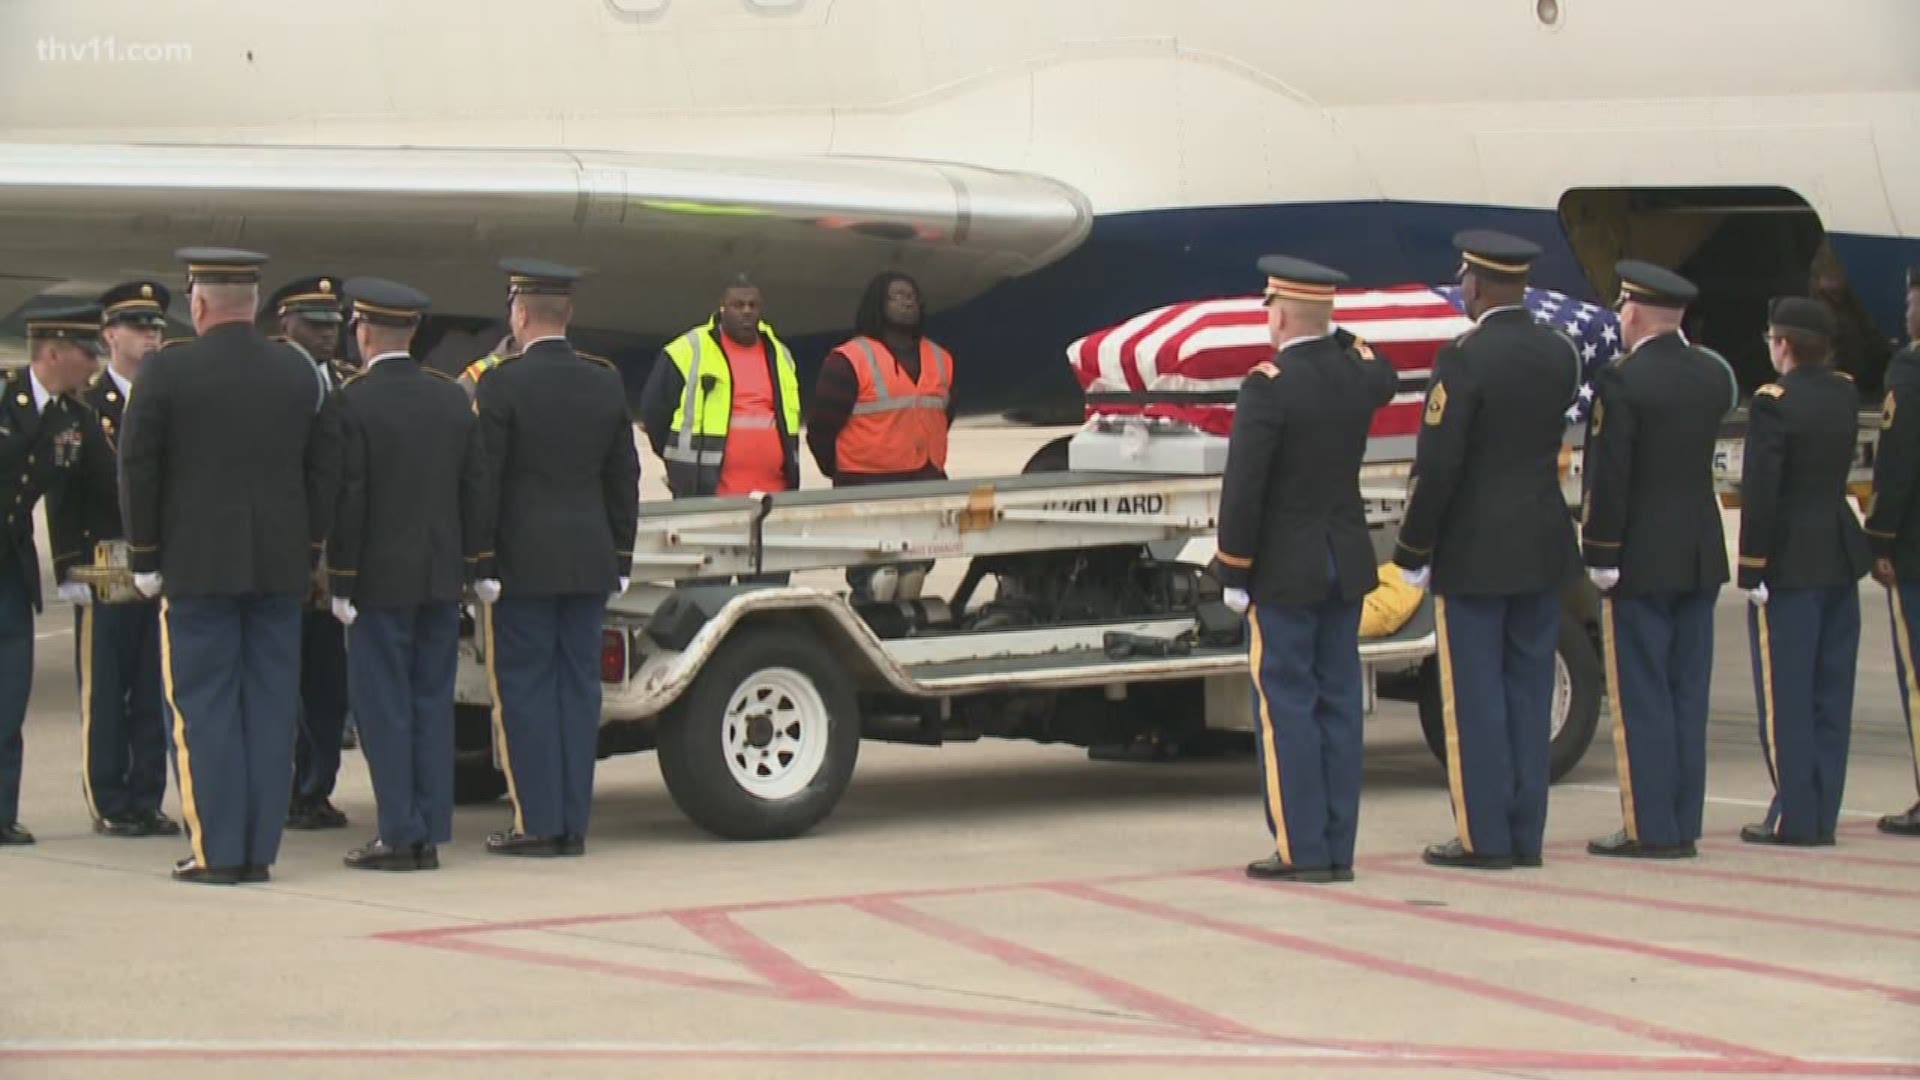 Body of WWII soldier returns home after 73 years